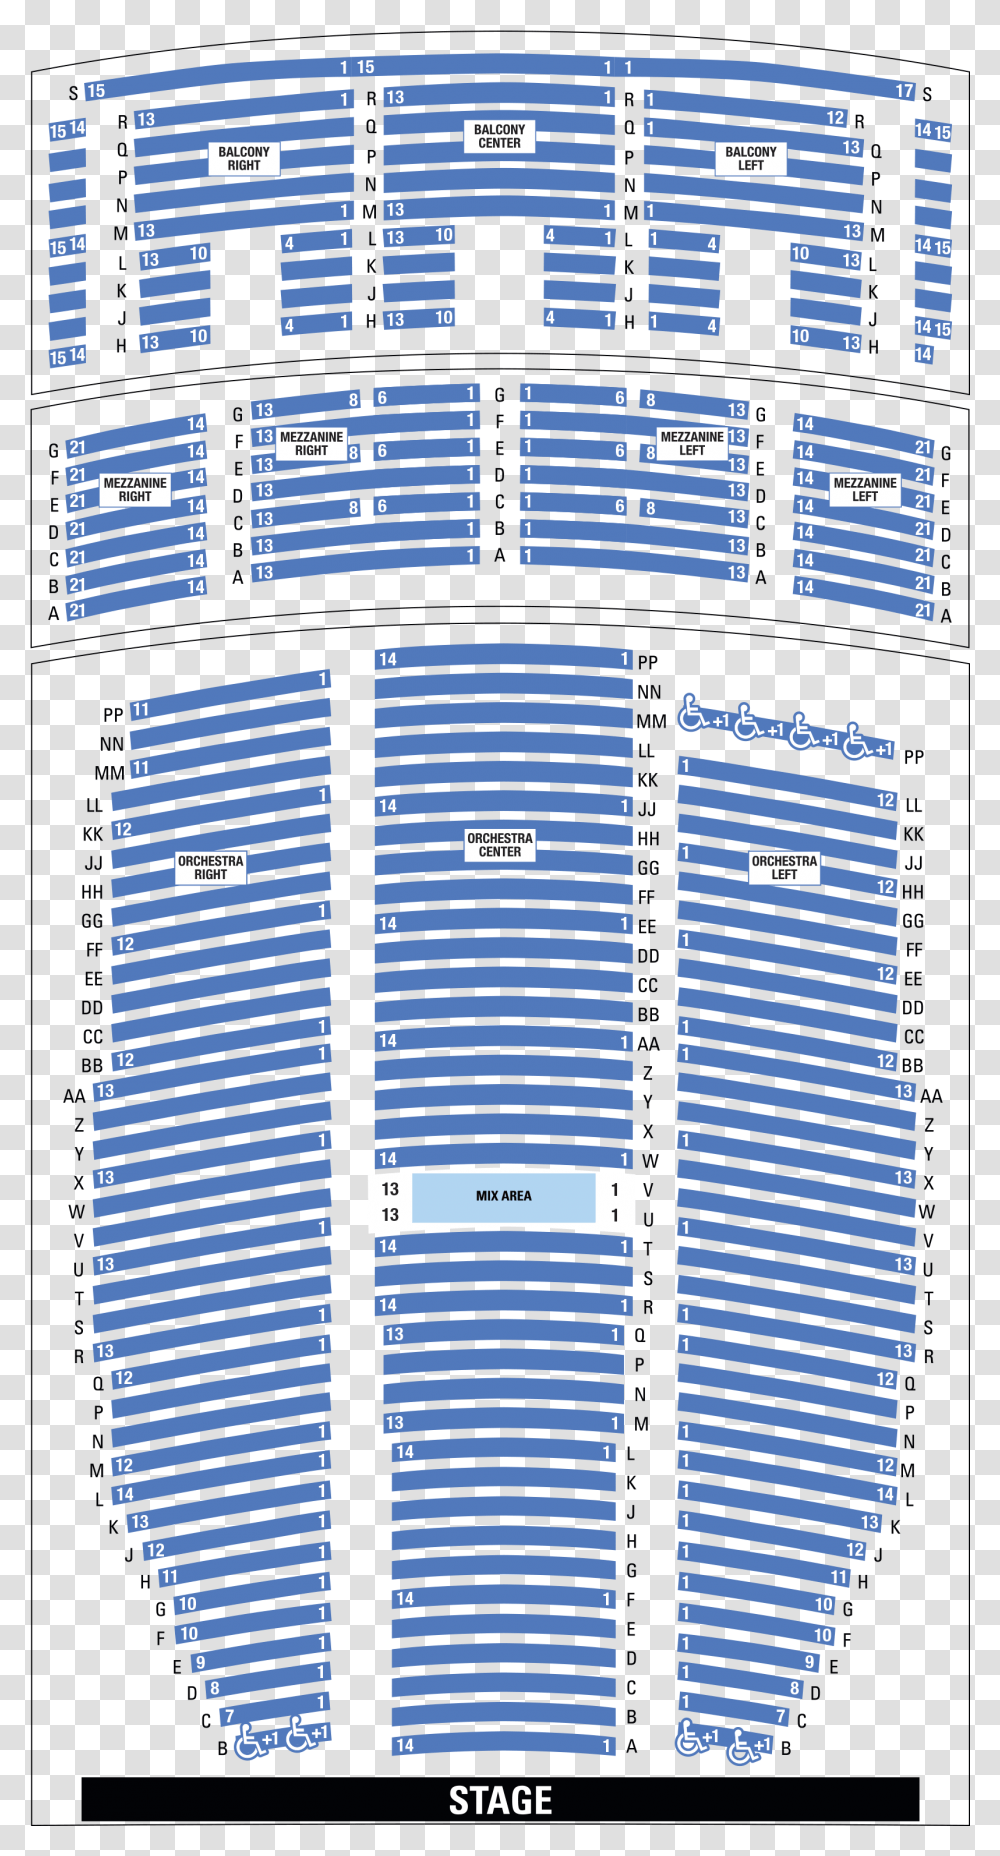 Paramount Denver Seating Map Paramount Theater Denver Seating Chart, Building, Home Decor, Office Building, Architecture Transparent Png